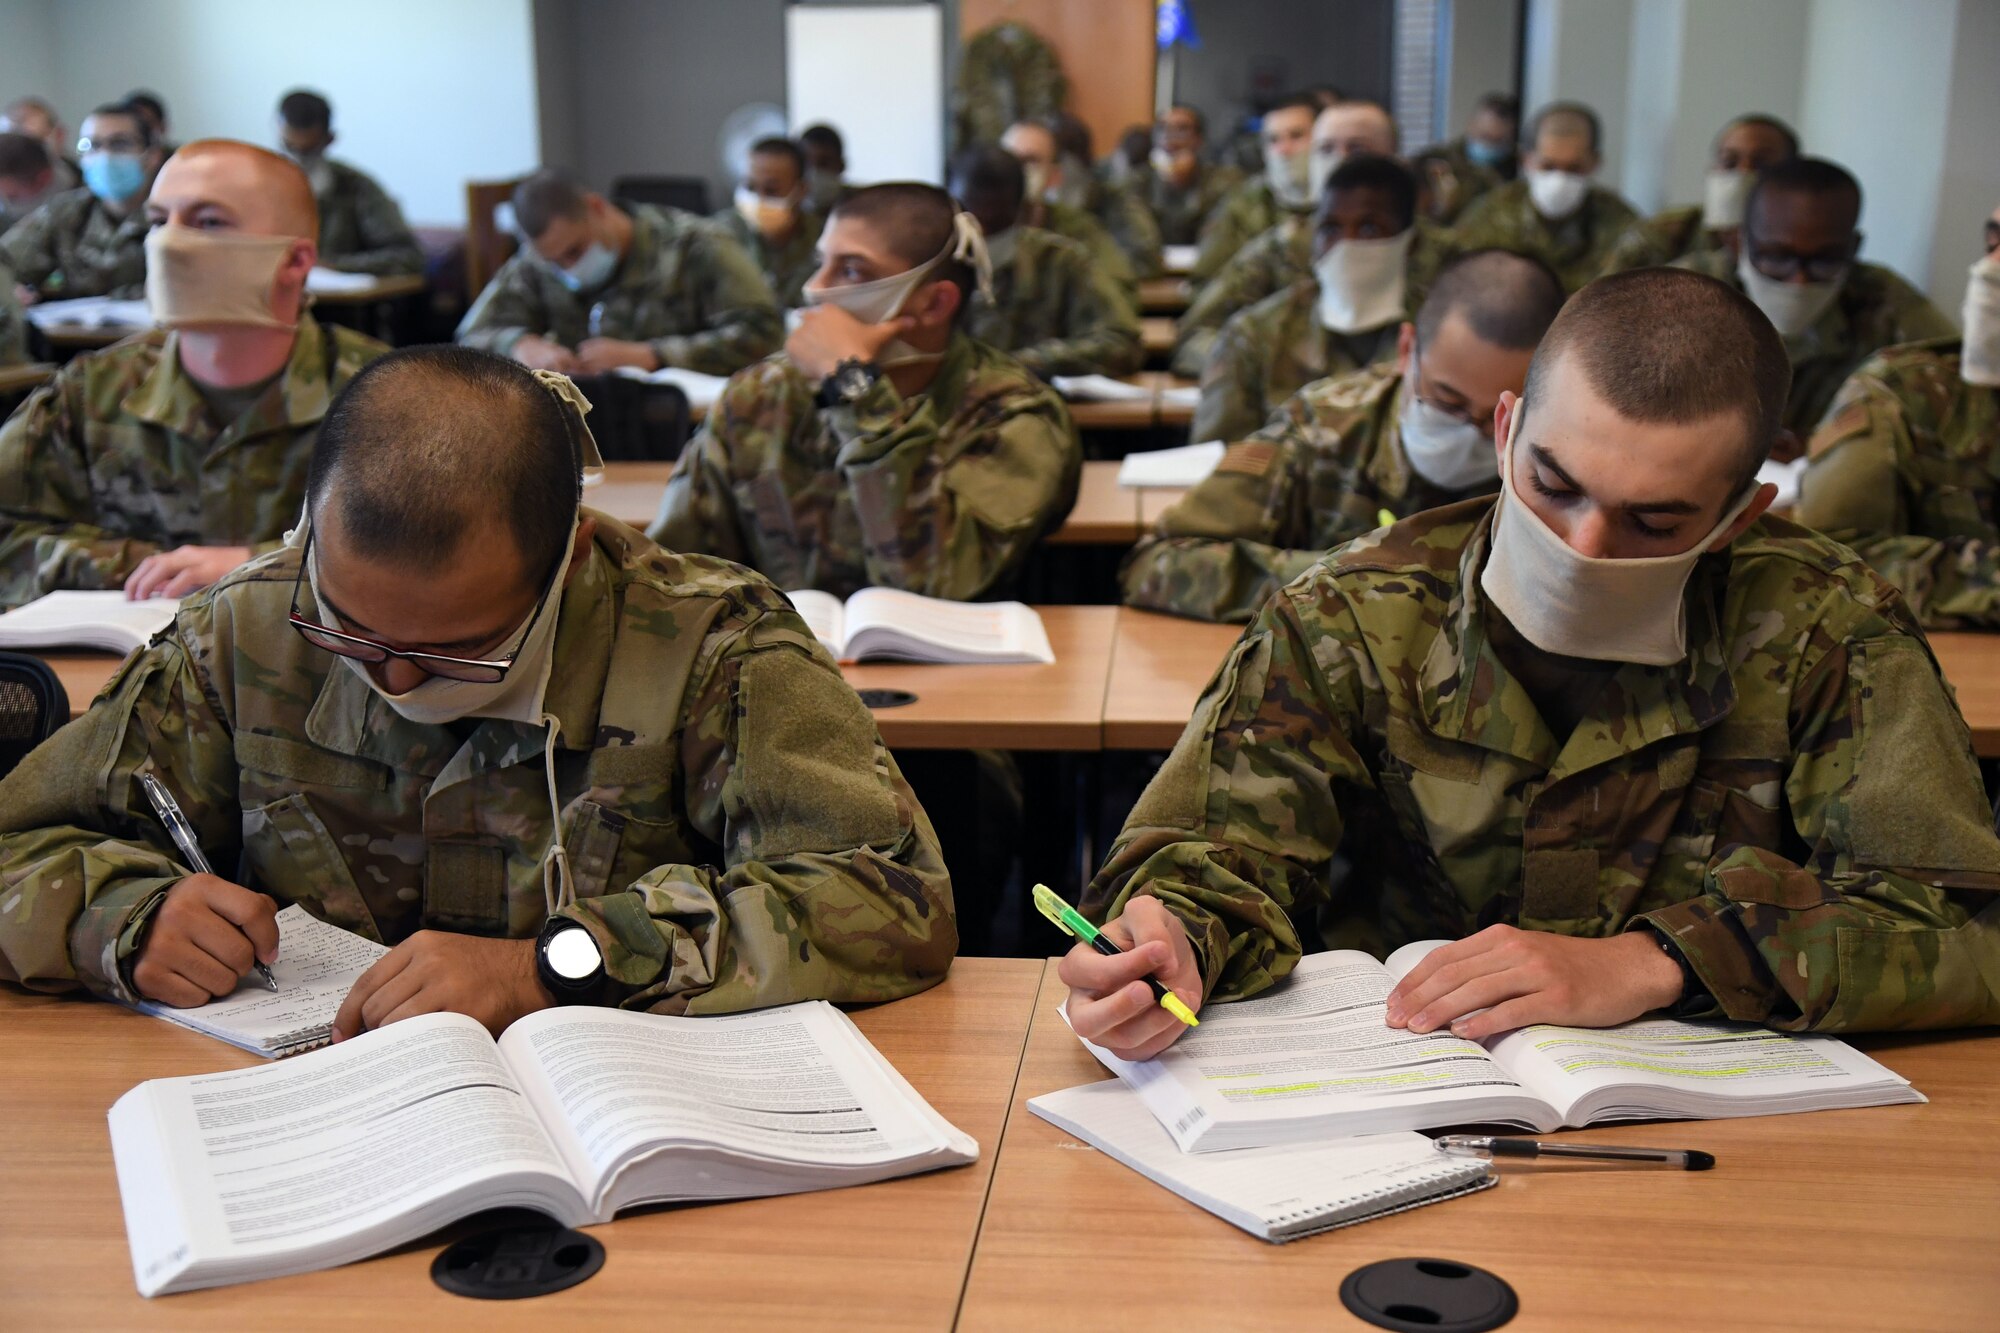 Military trainees in class.